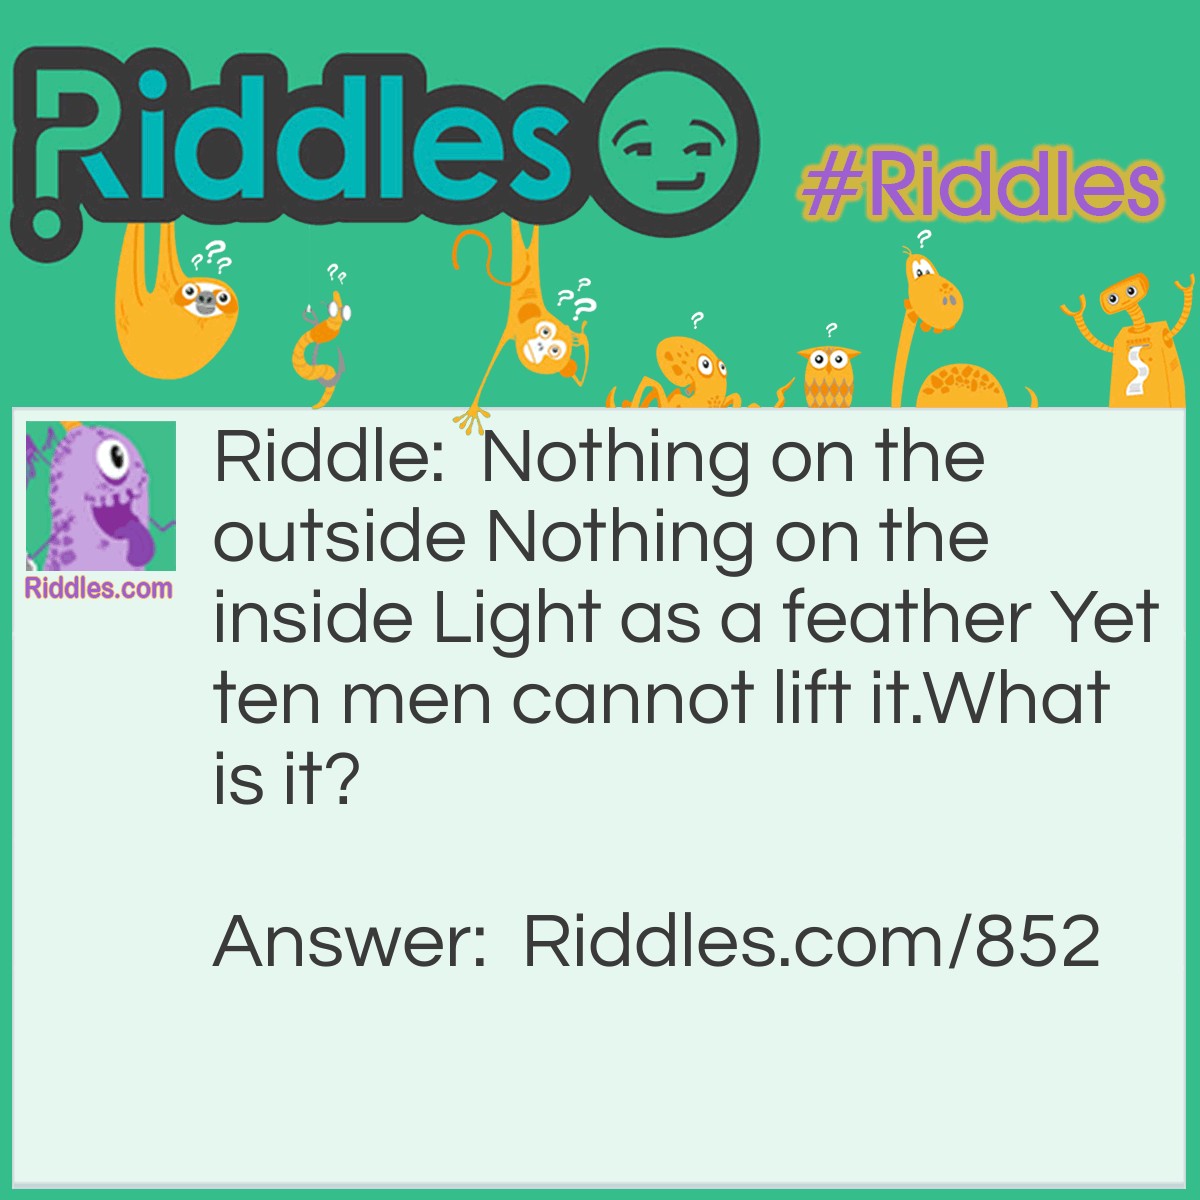 Riddle: Nothing on the outside Nothing on the inside Light as a feather Yet ten men cannot lift it.
What is it? Answer: A bubble.